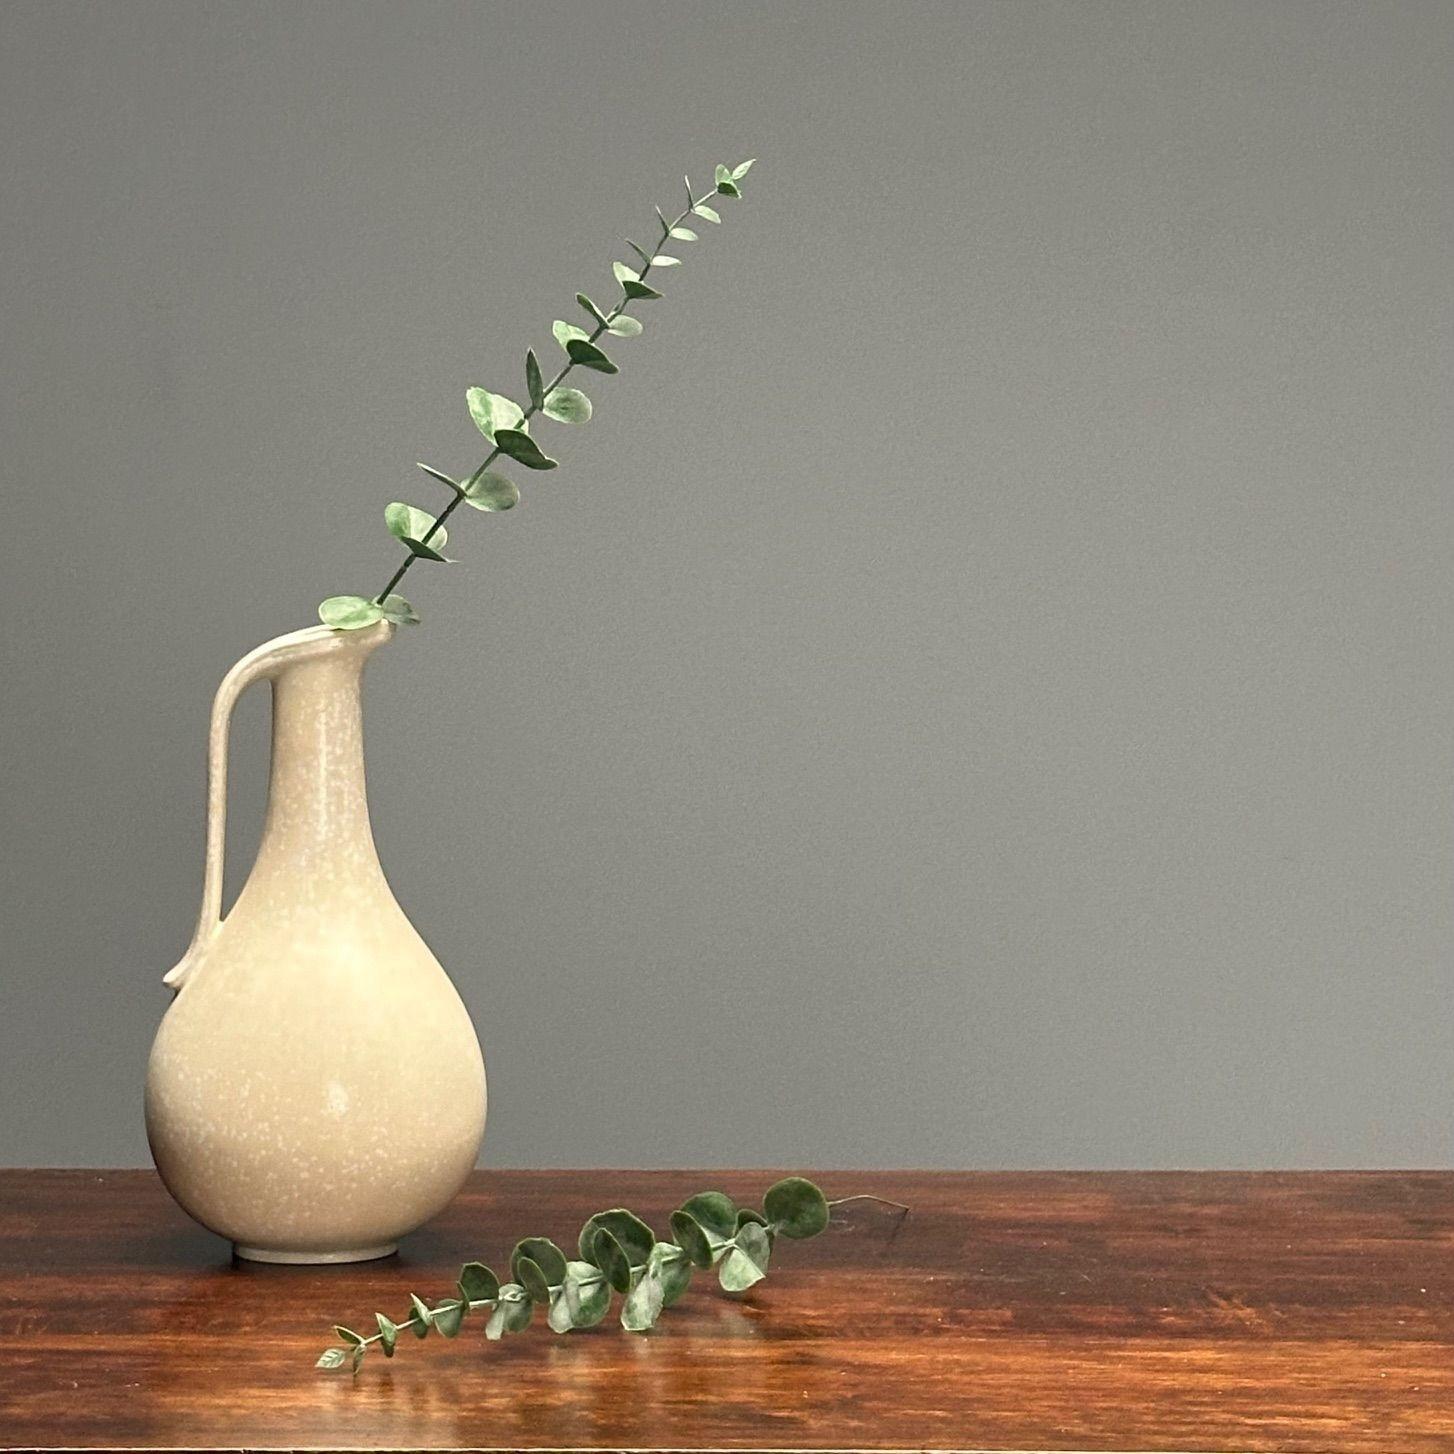 Gunnar Nylund, Swedish Mid-Century Modern, Ceramic Vase, Vessel, Jug, Eggshell Glaze, 1940s

Stoneware jug, vase, or vessell designed by Gunnar Nylund for Rorstrand in Sweden in the middle of the 20th century. This example features a nice neautral